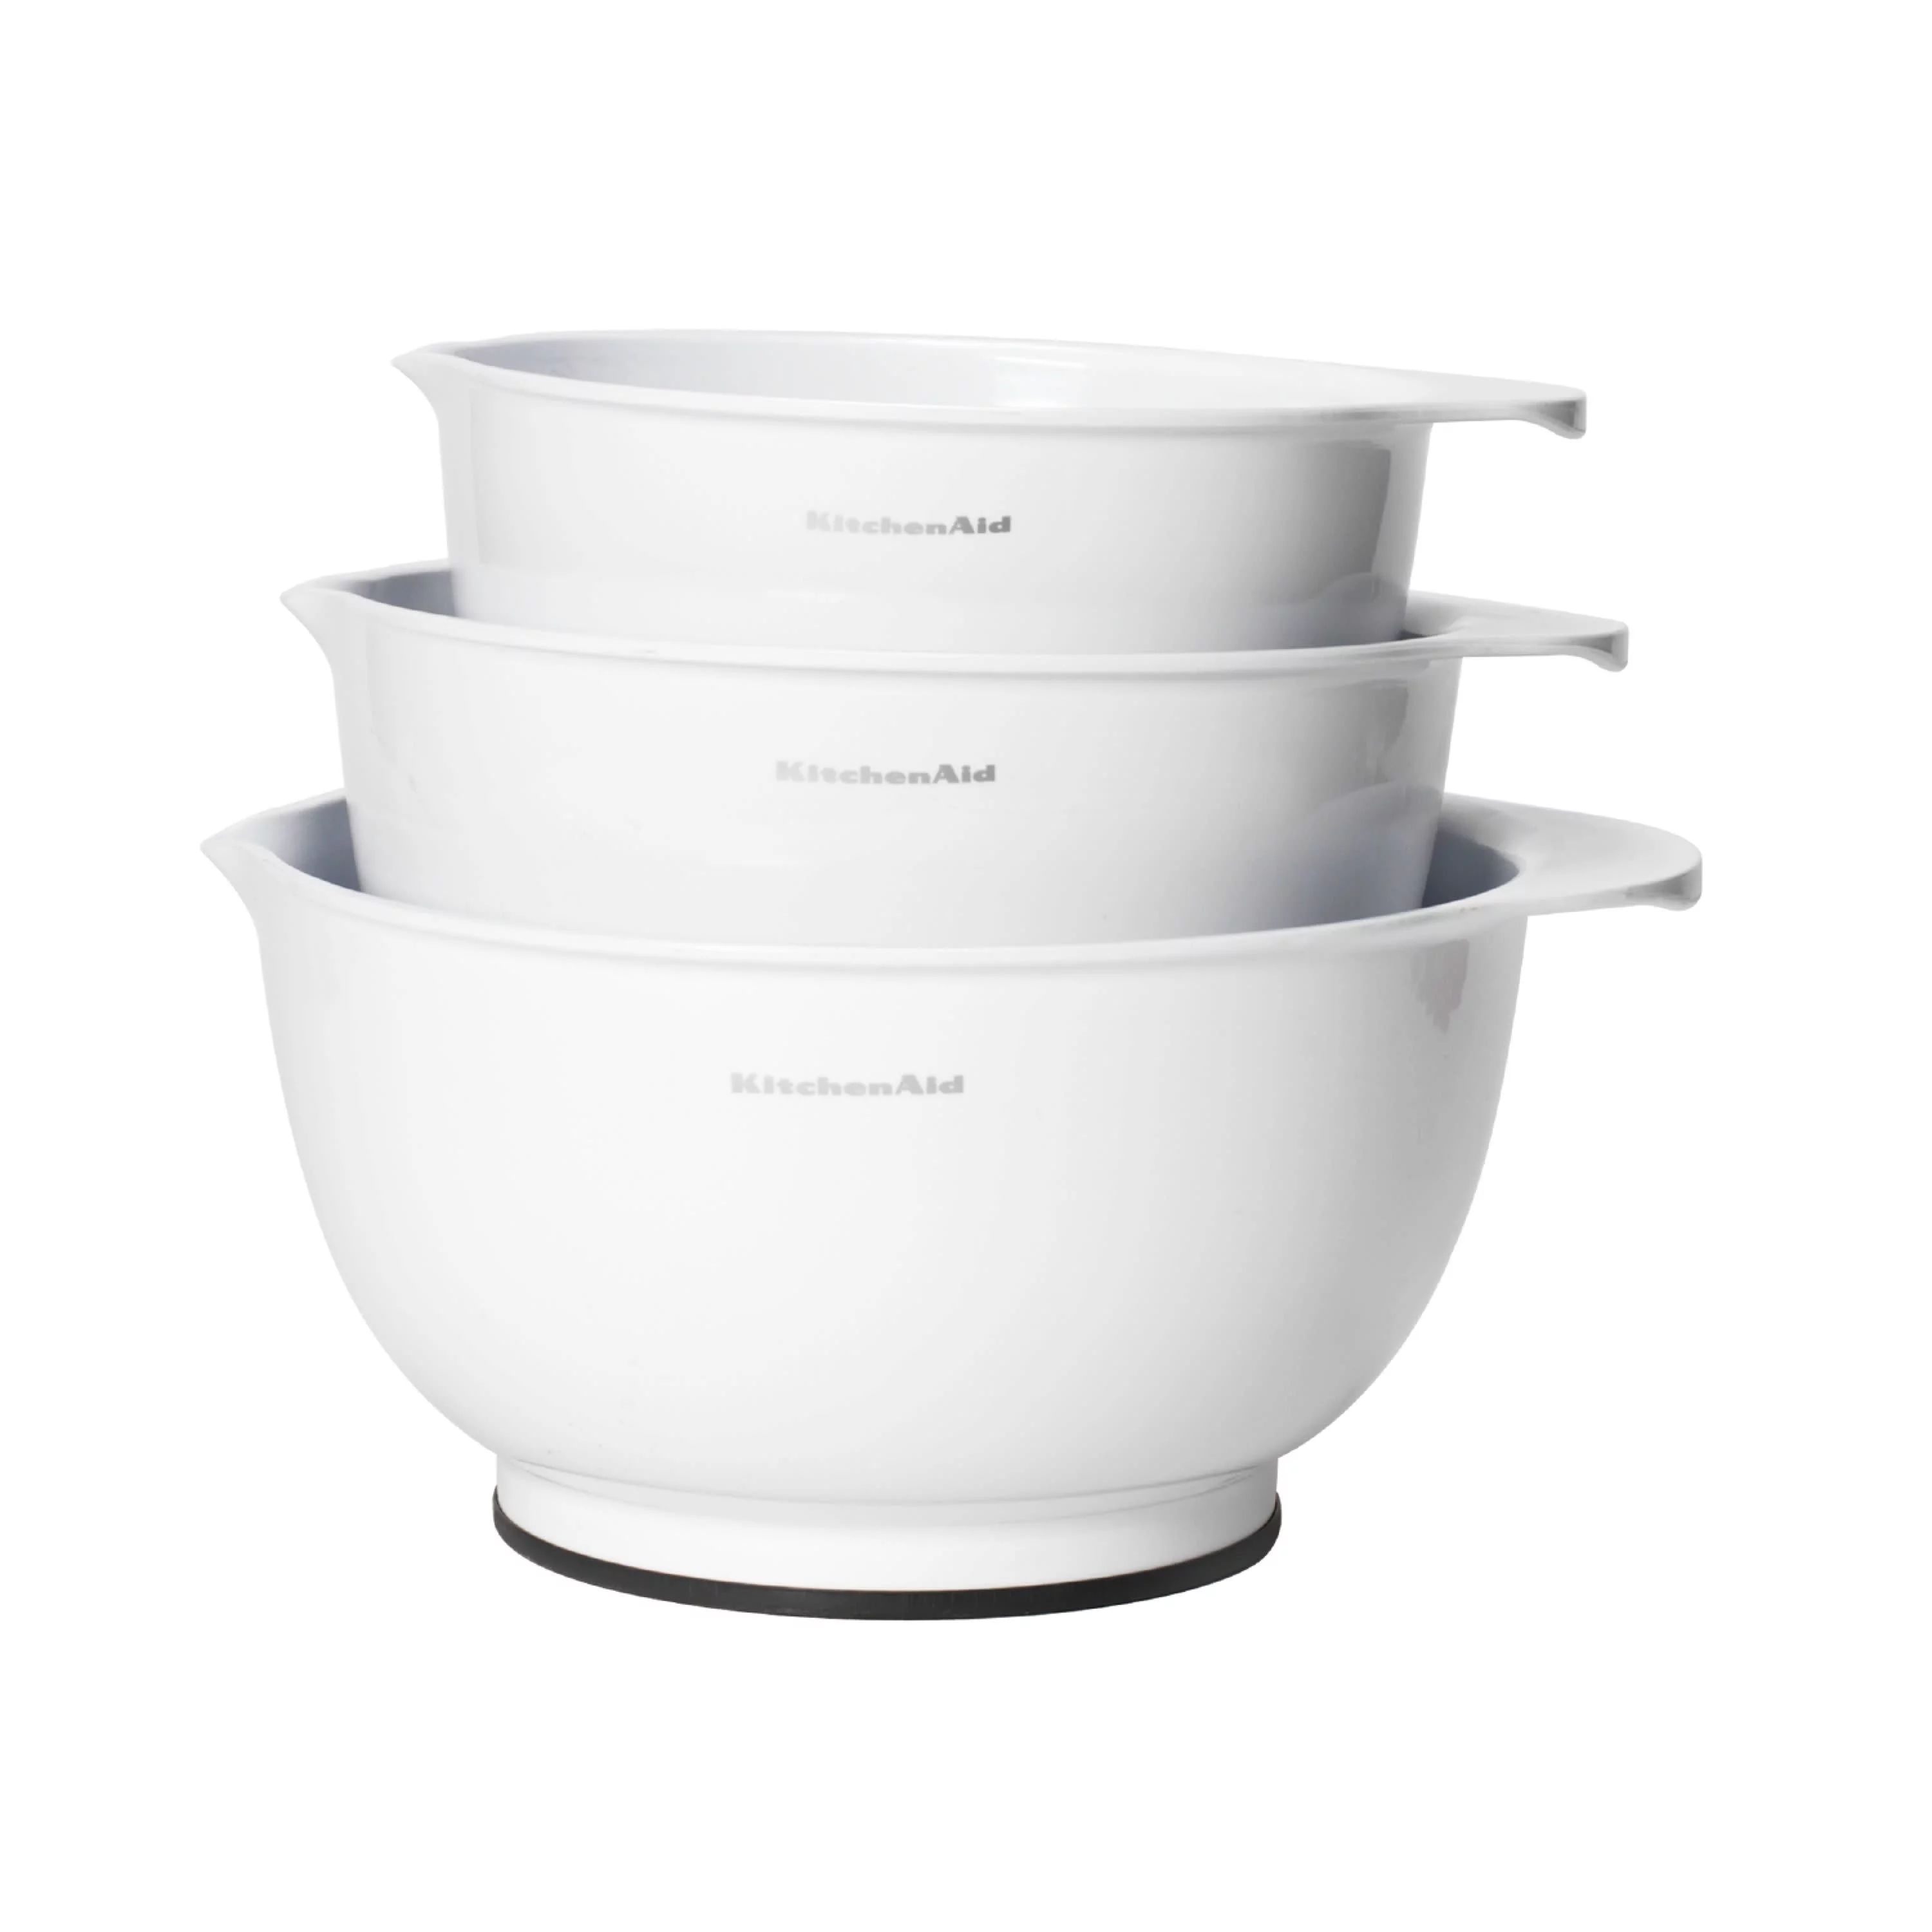 Kitchenaid BPA-Free Plastic Set of 3 Mixing Bowls with Soft Foot in White | Walmart (US)